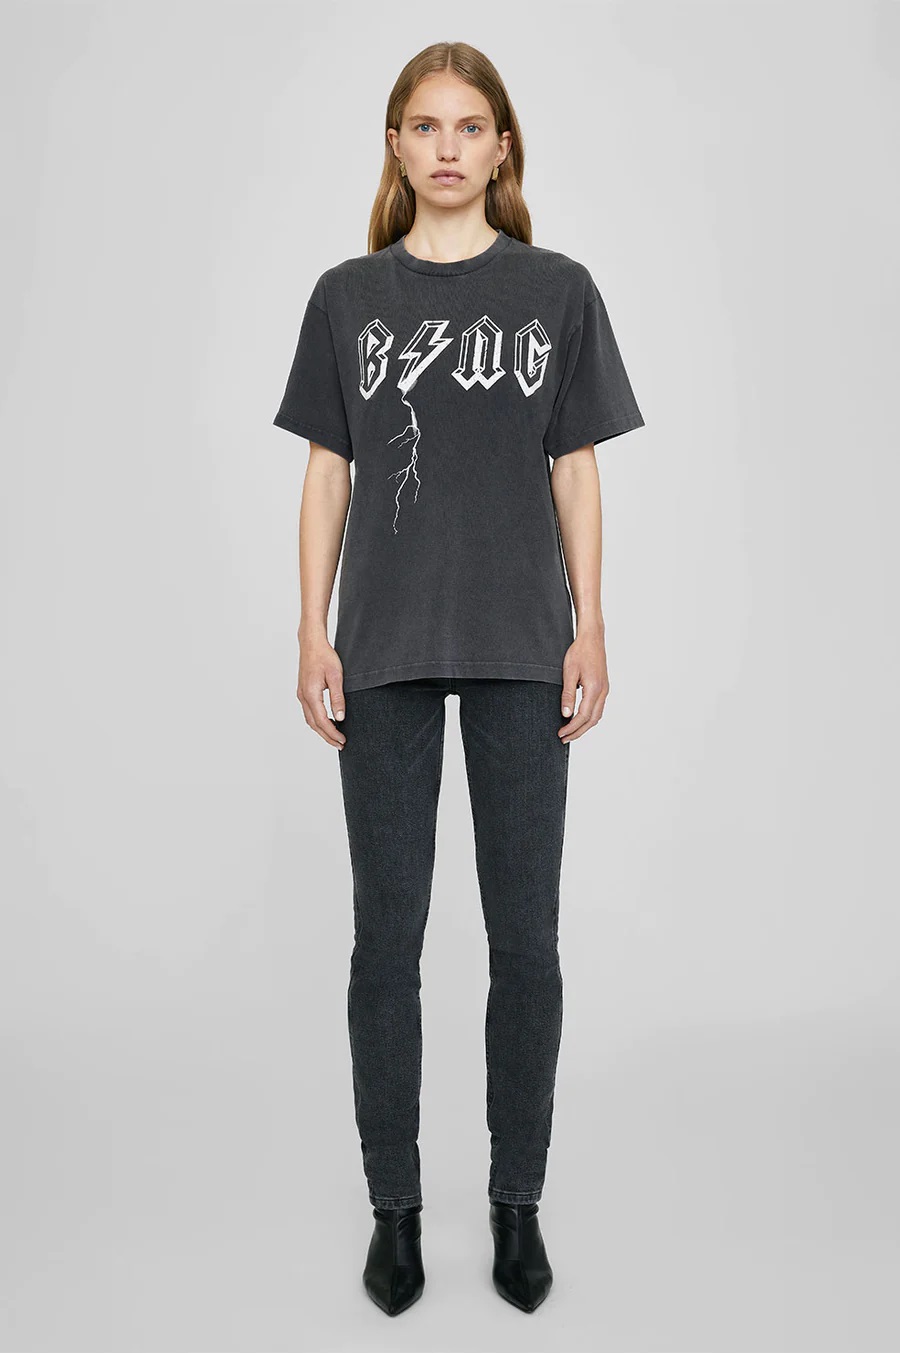 ANINE BING Bolt Tee in Washed Black L